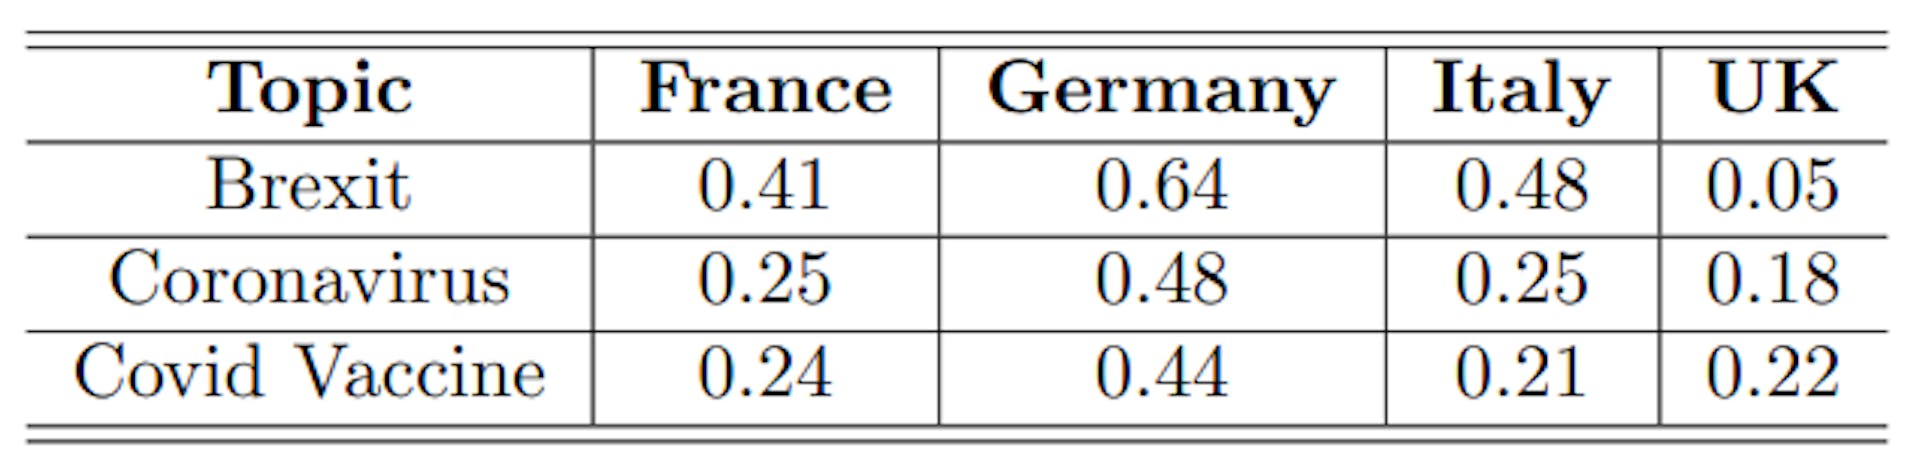 Table 1: The table showcases adjusted assortativity coefficients (Karimi and Oliveira, 2022) for key topics across France, Germany, Italy, and the UK. These coefficients measure the tendency of nodes to be connected to nodes with similar degrees within each country’s topic-based network. Notably, variations across countries highlight distinct patterns of intra-network connectivity for each topic.